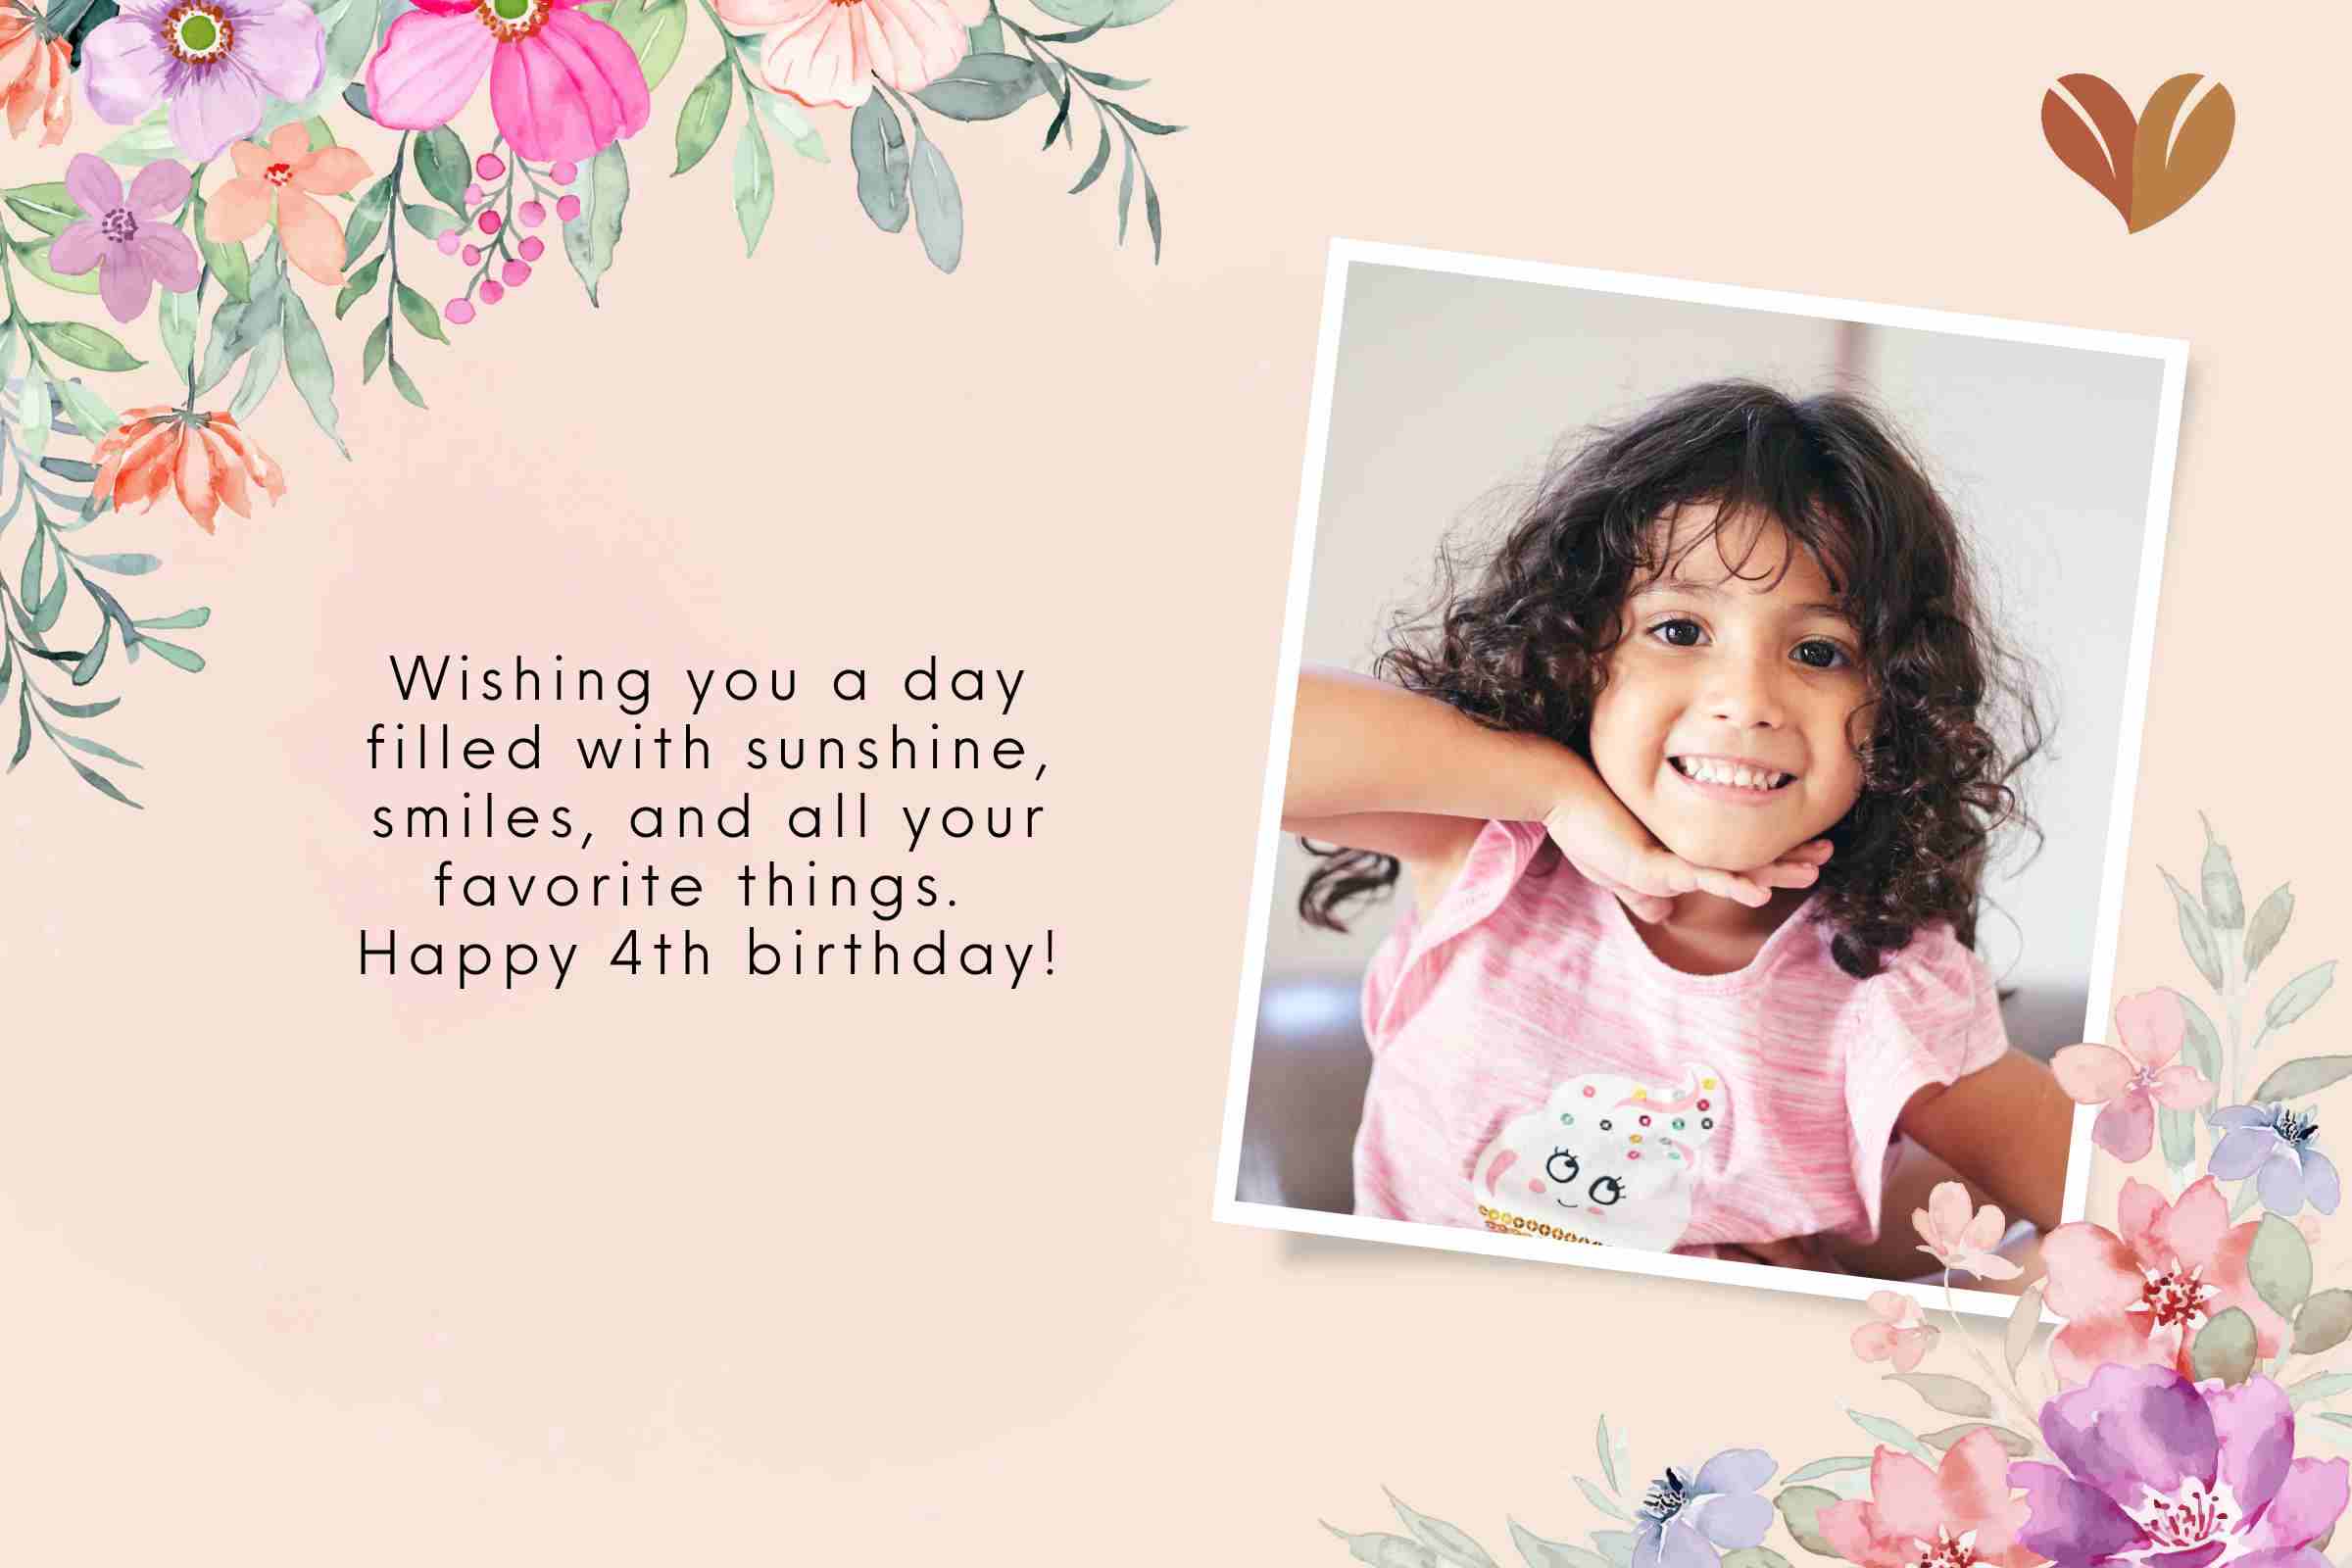 Happy 4th birthday to our radiant little star! May your day be brimming with laughter and boundless joy.